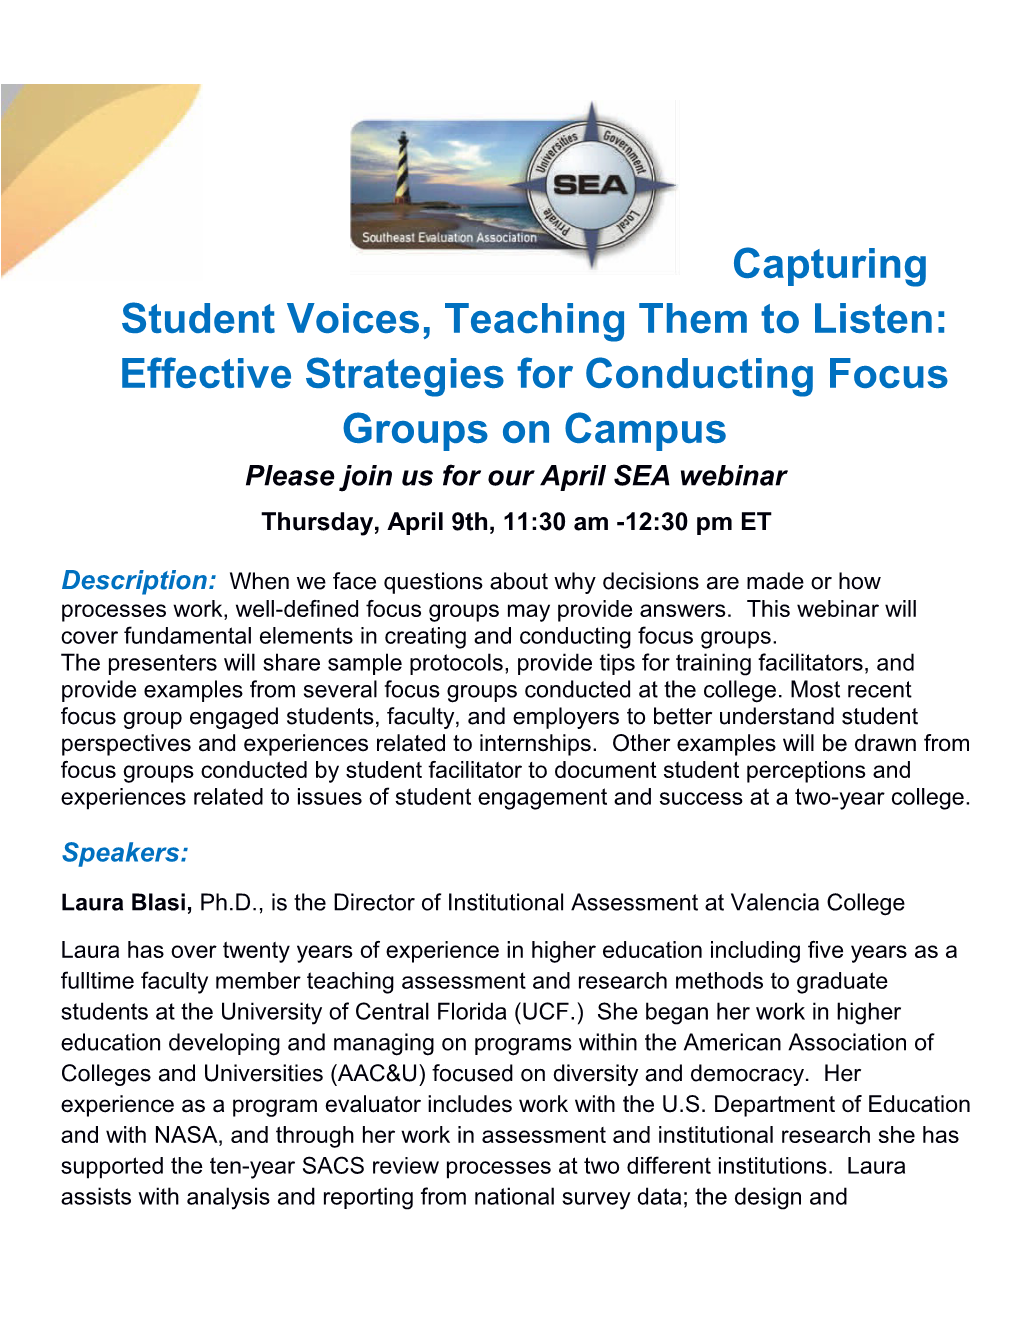 Please Join Us for Our April SEA Webinar